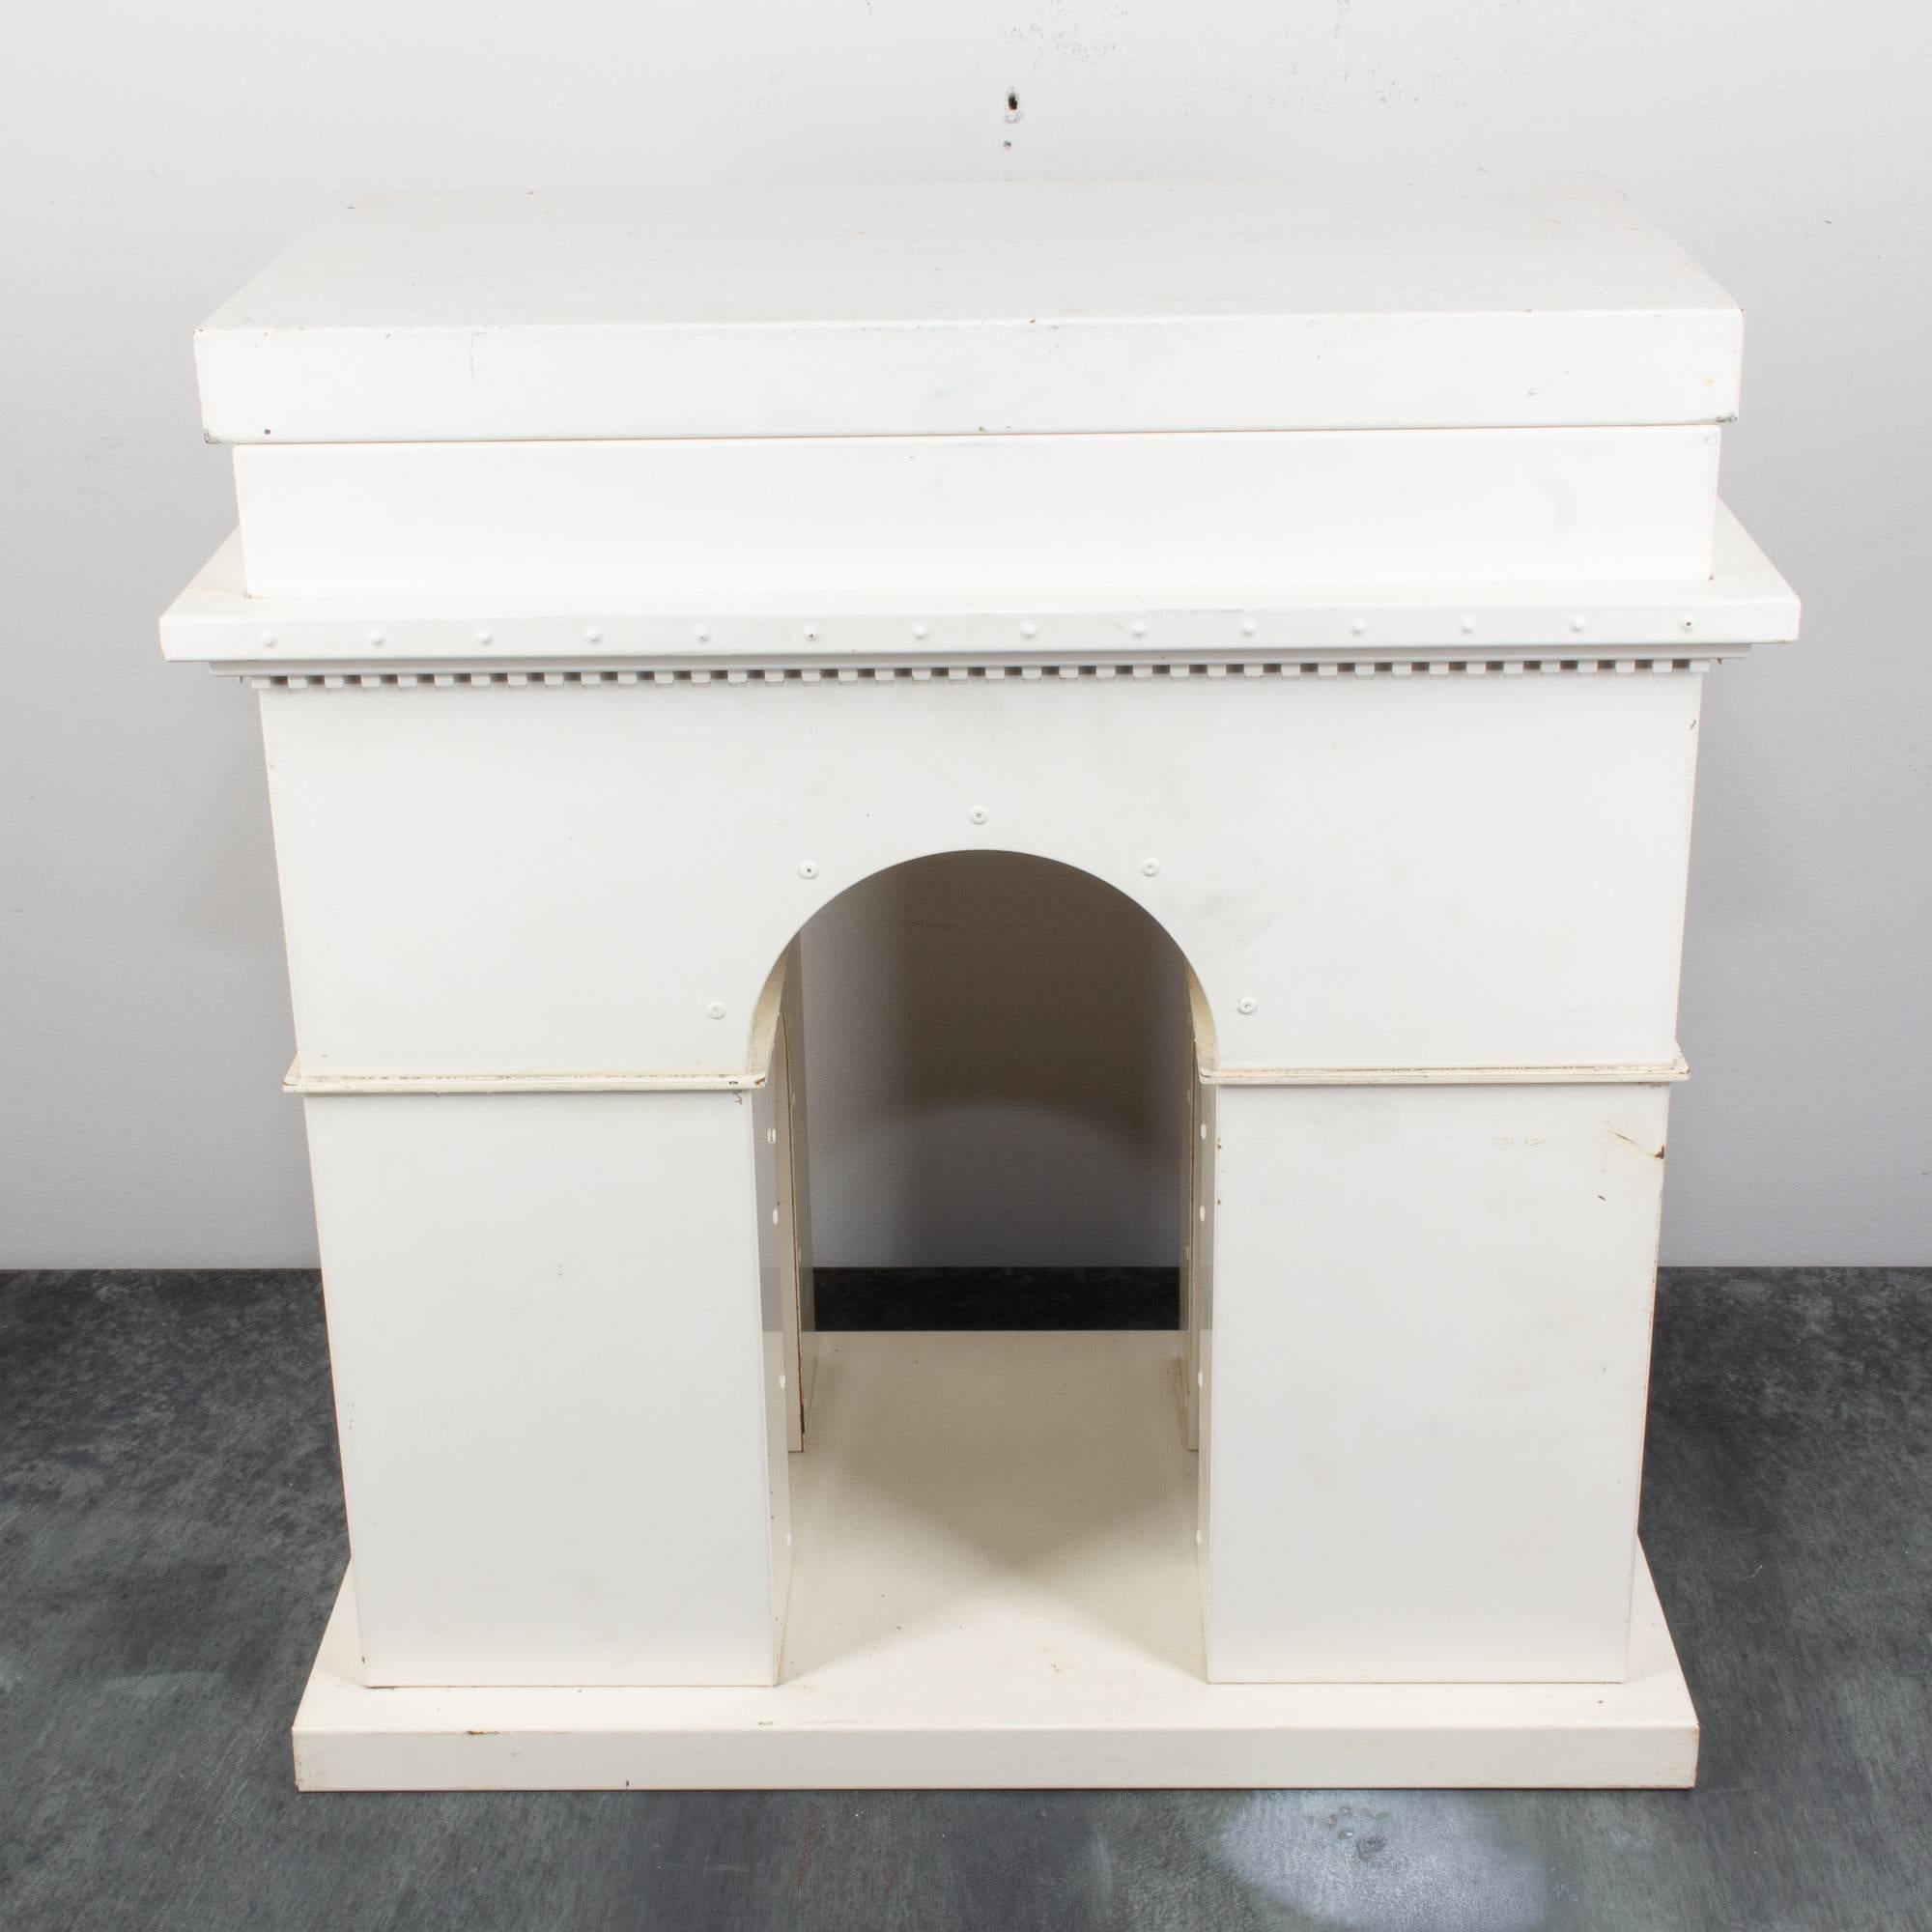 This is a fantastic metal scale model of the famous Arc de Triomphe in Paris, France, crafted in the 1950s. The ivory painted finish gives this sculpture a very austere appearance, and has a removable 